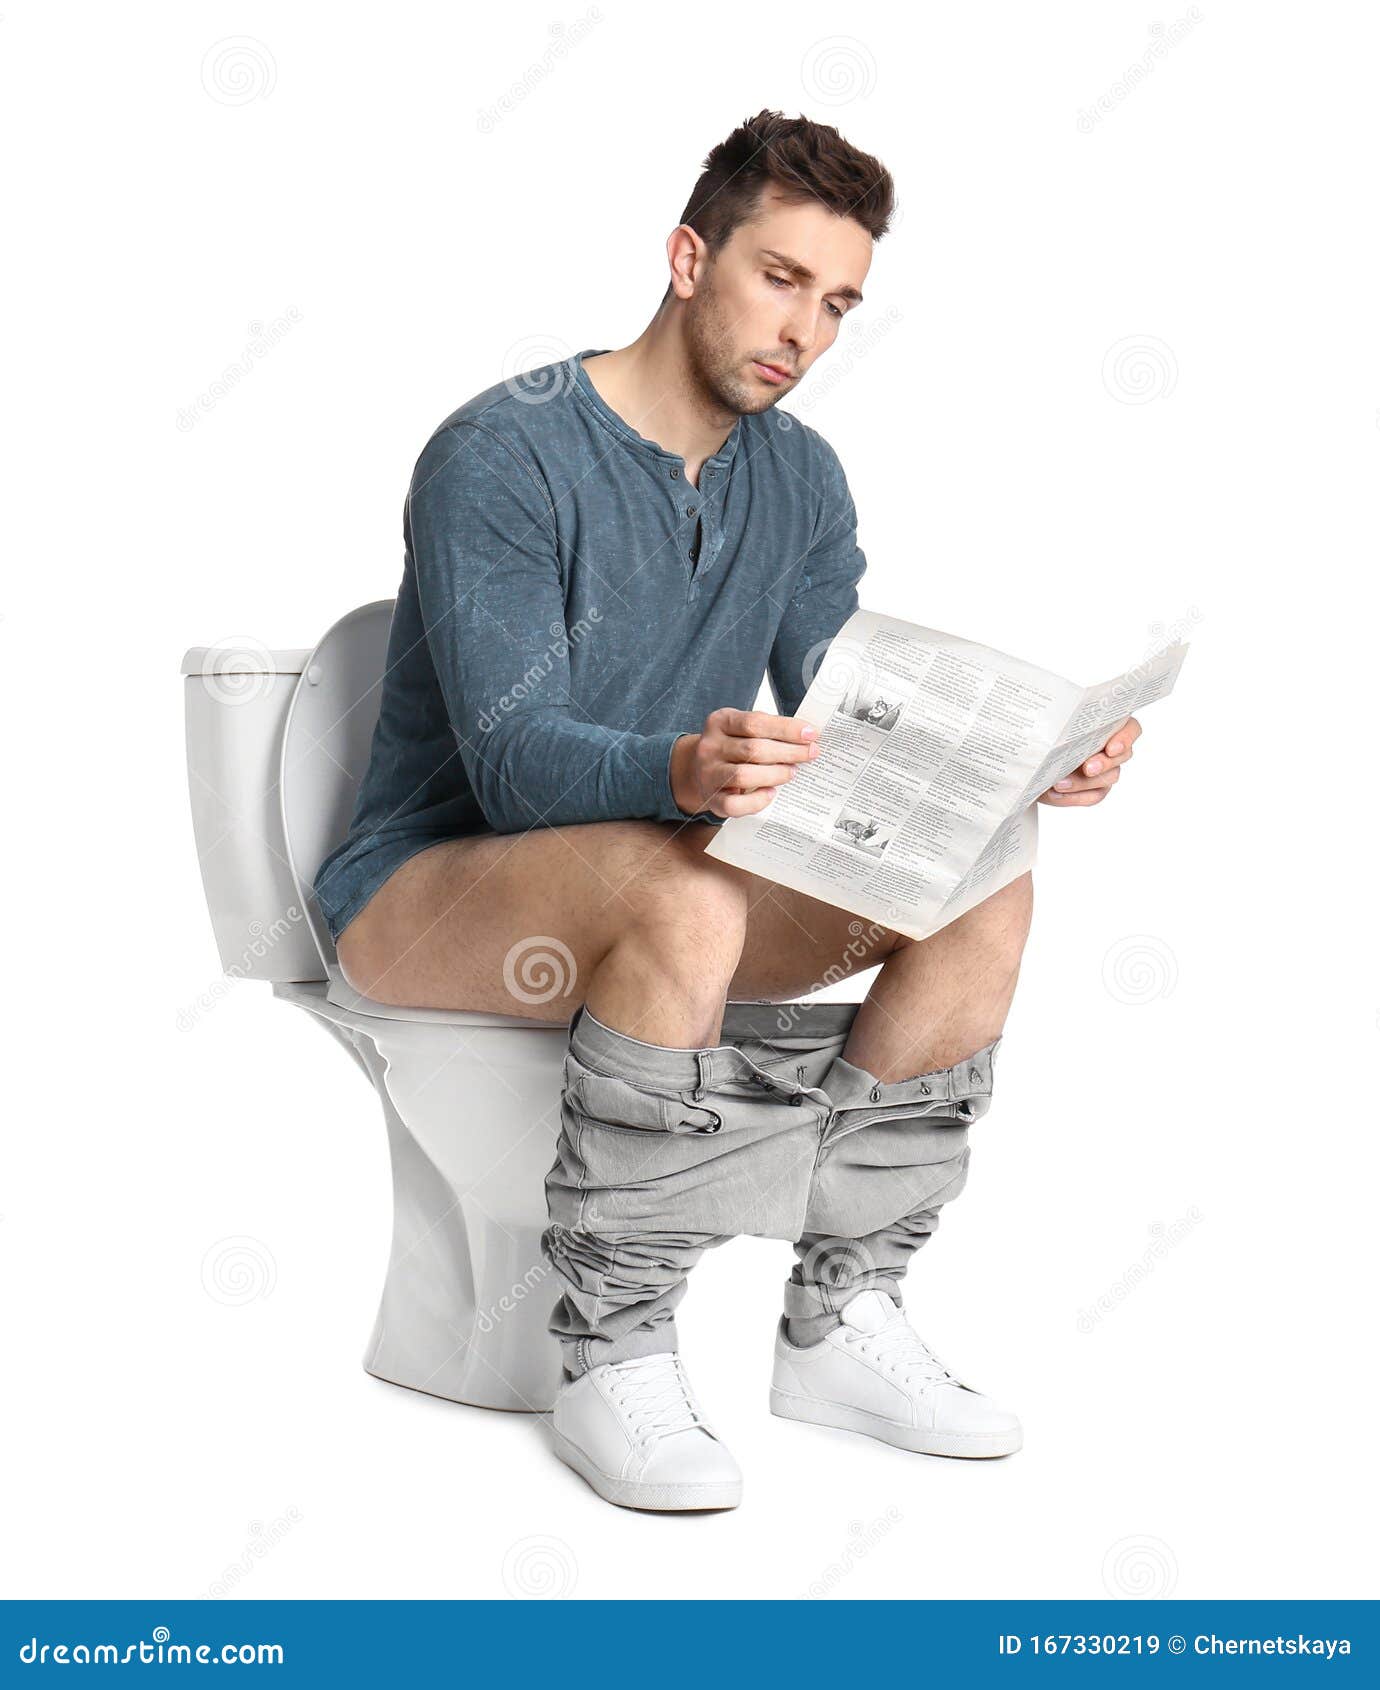 Man Sitting On Toilet Seat Reading A Newspaper Stock Image 